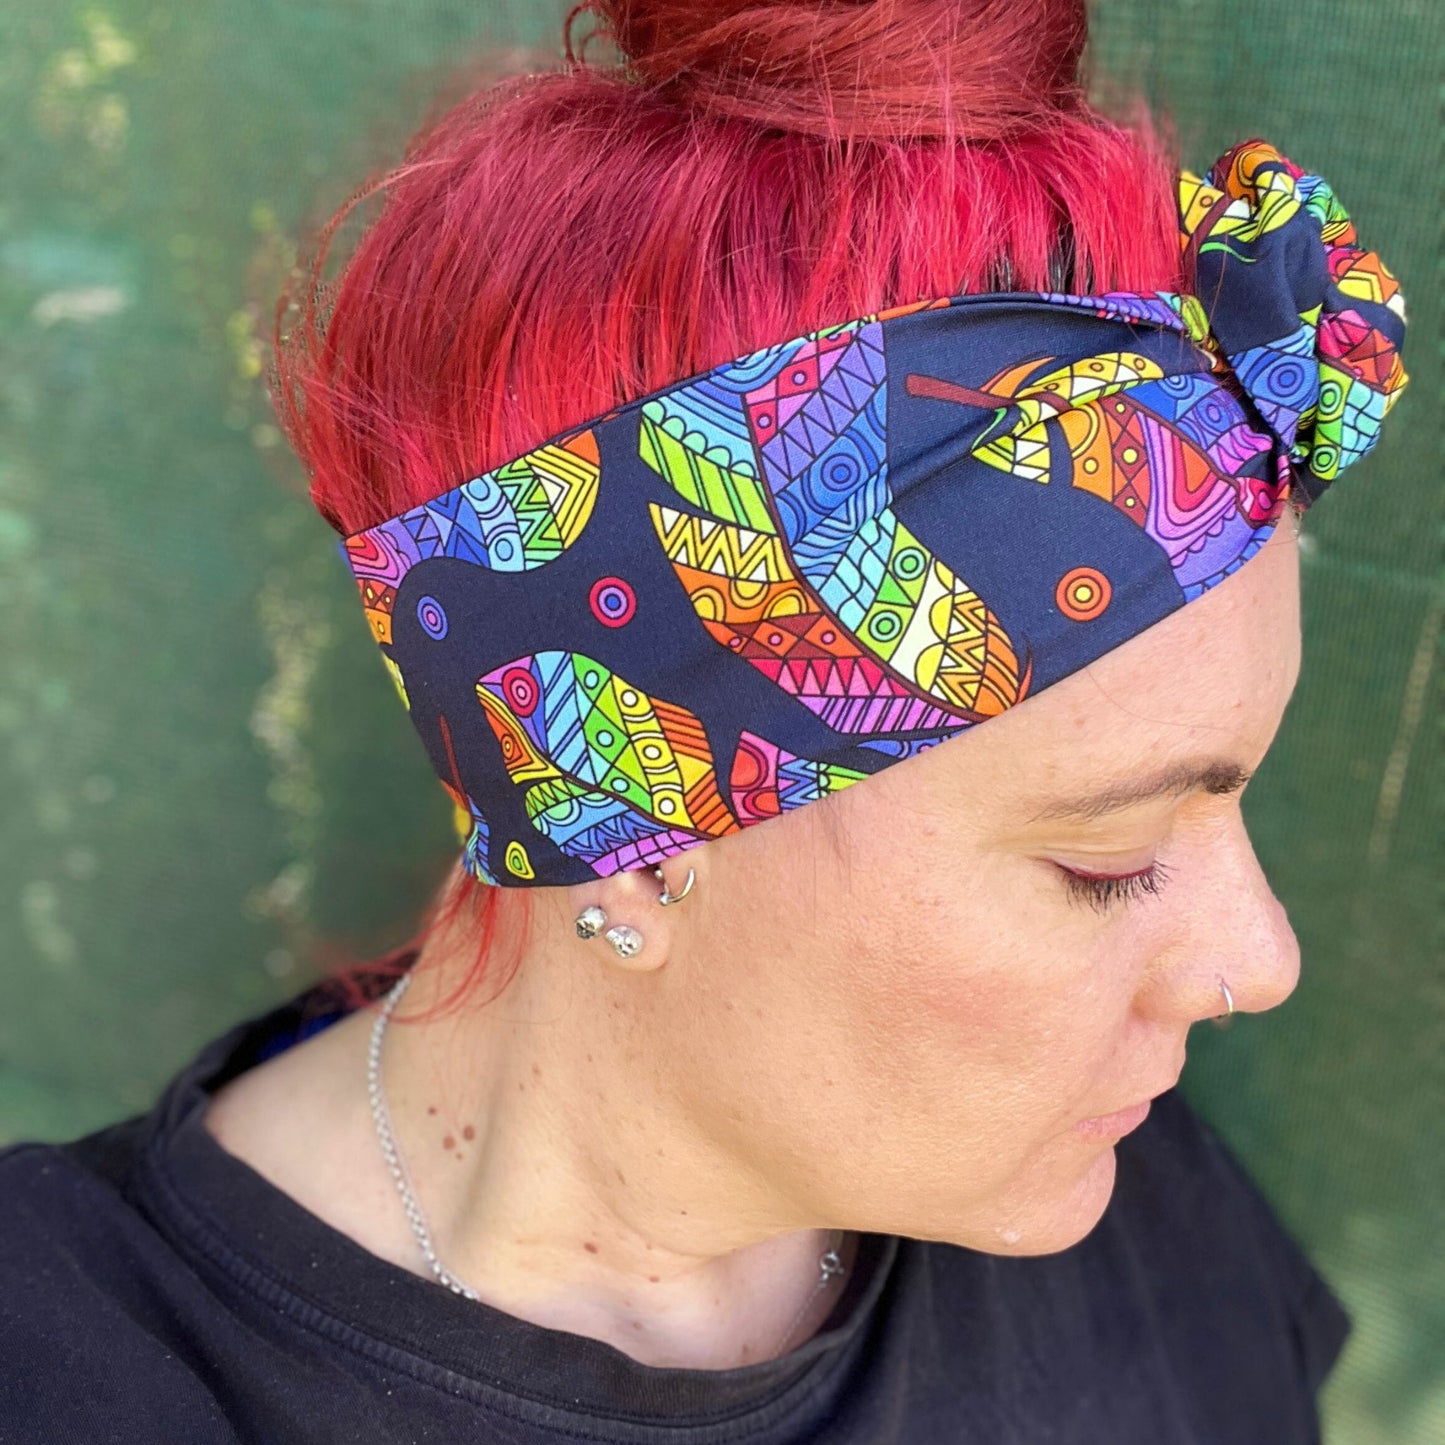 wearing a headwrap with a striking Maori-inspired feather design. The pattern is vibrant, showcasing a spectrum of colors like yellow, red, green, and blue on a dark background